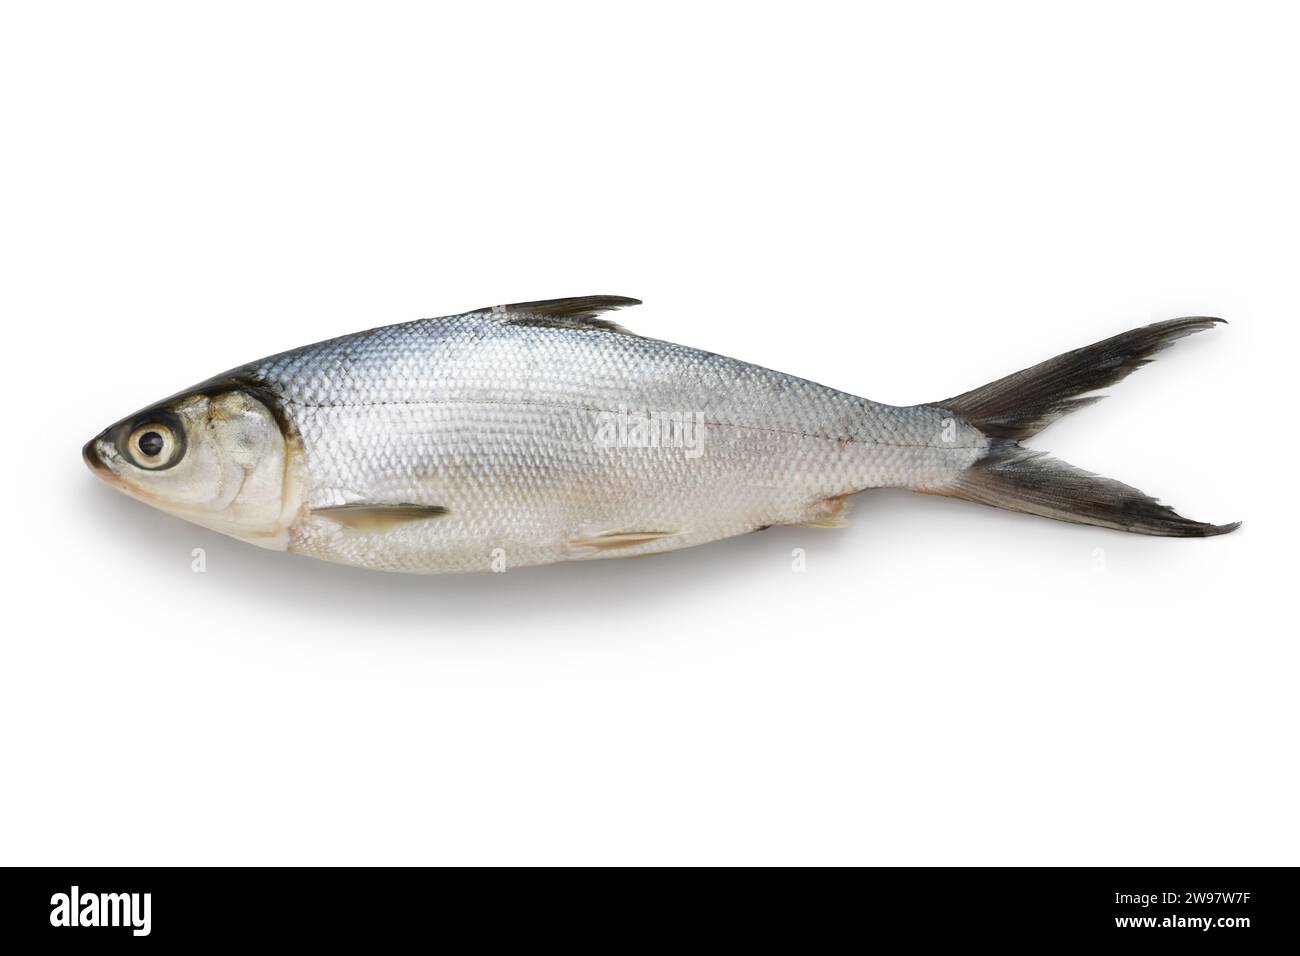 Milkfish is an important seafood in Southeast Asia as it is easily farmed. Stock Photo